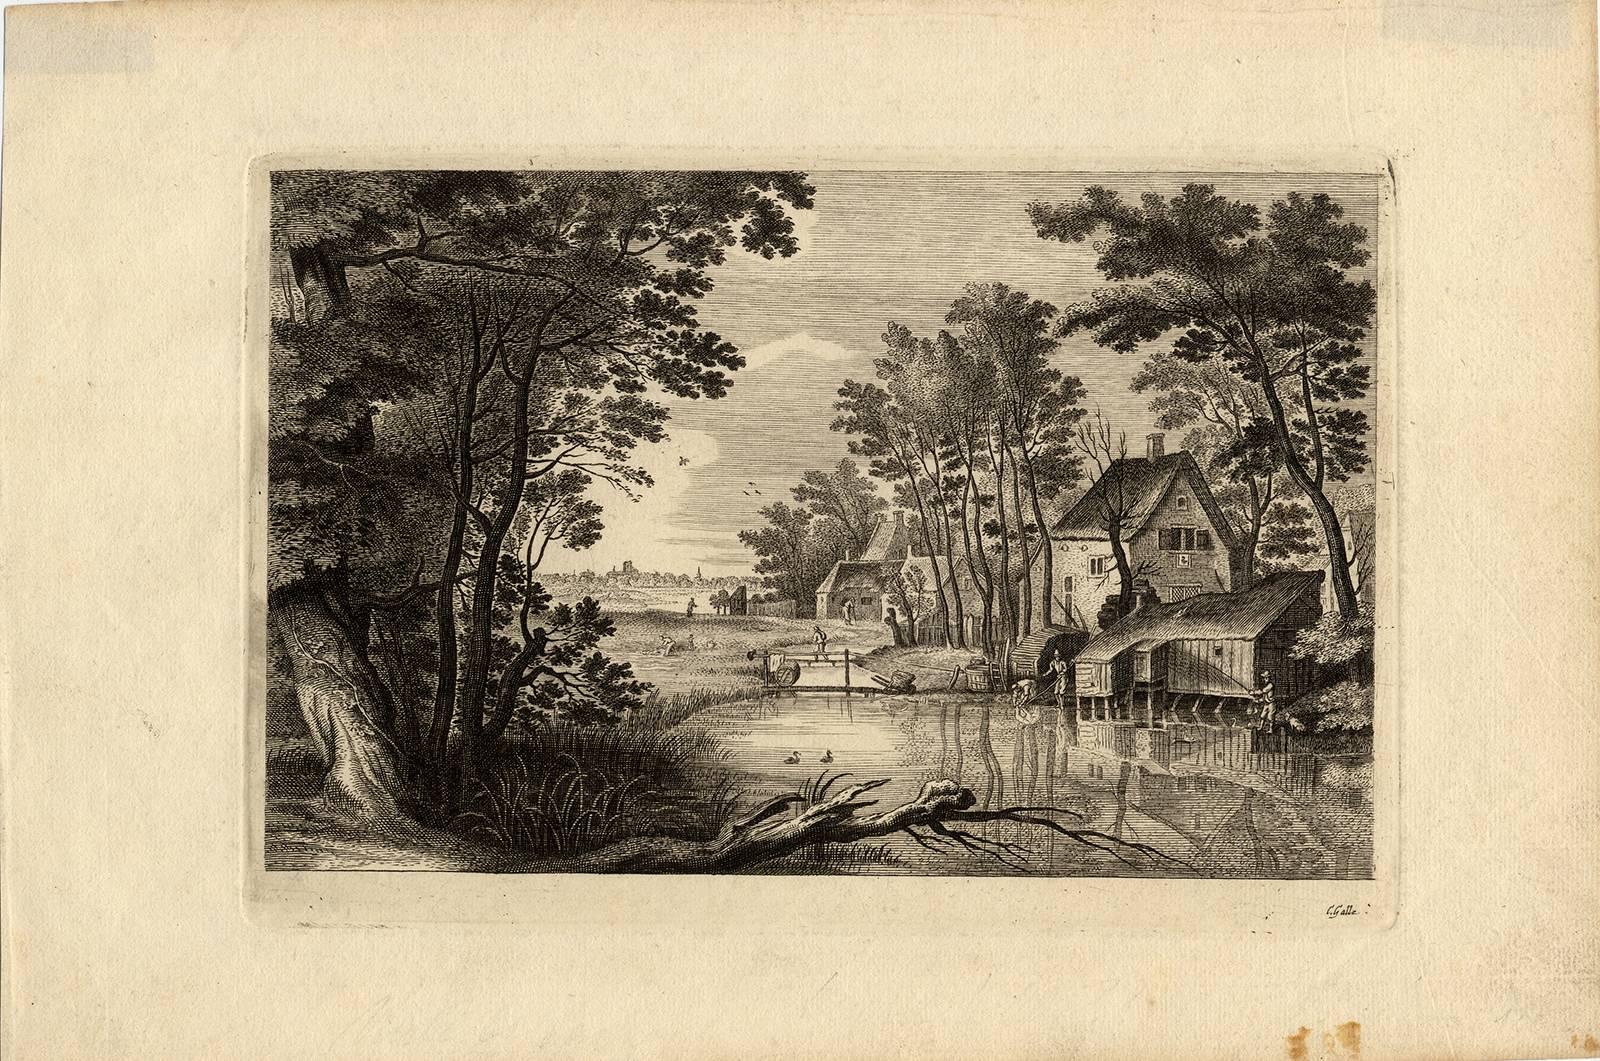 Alexander Voet Landscape Print - Untitled - Wooded landscape near a pond with a farm.